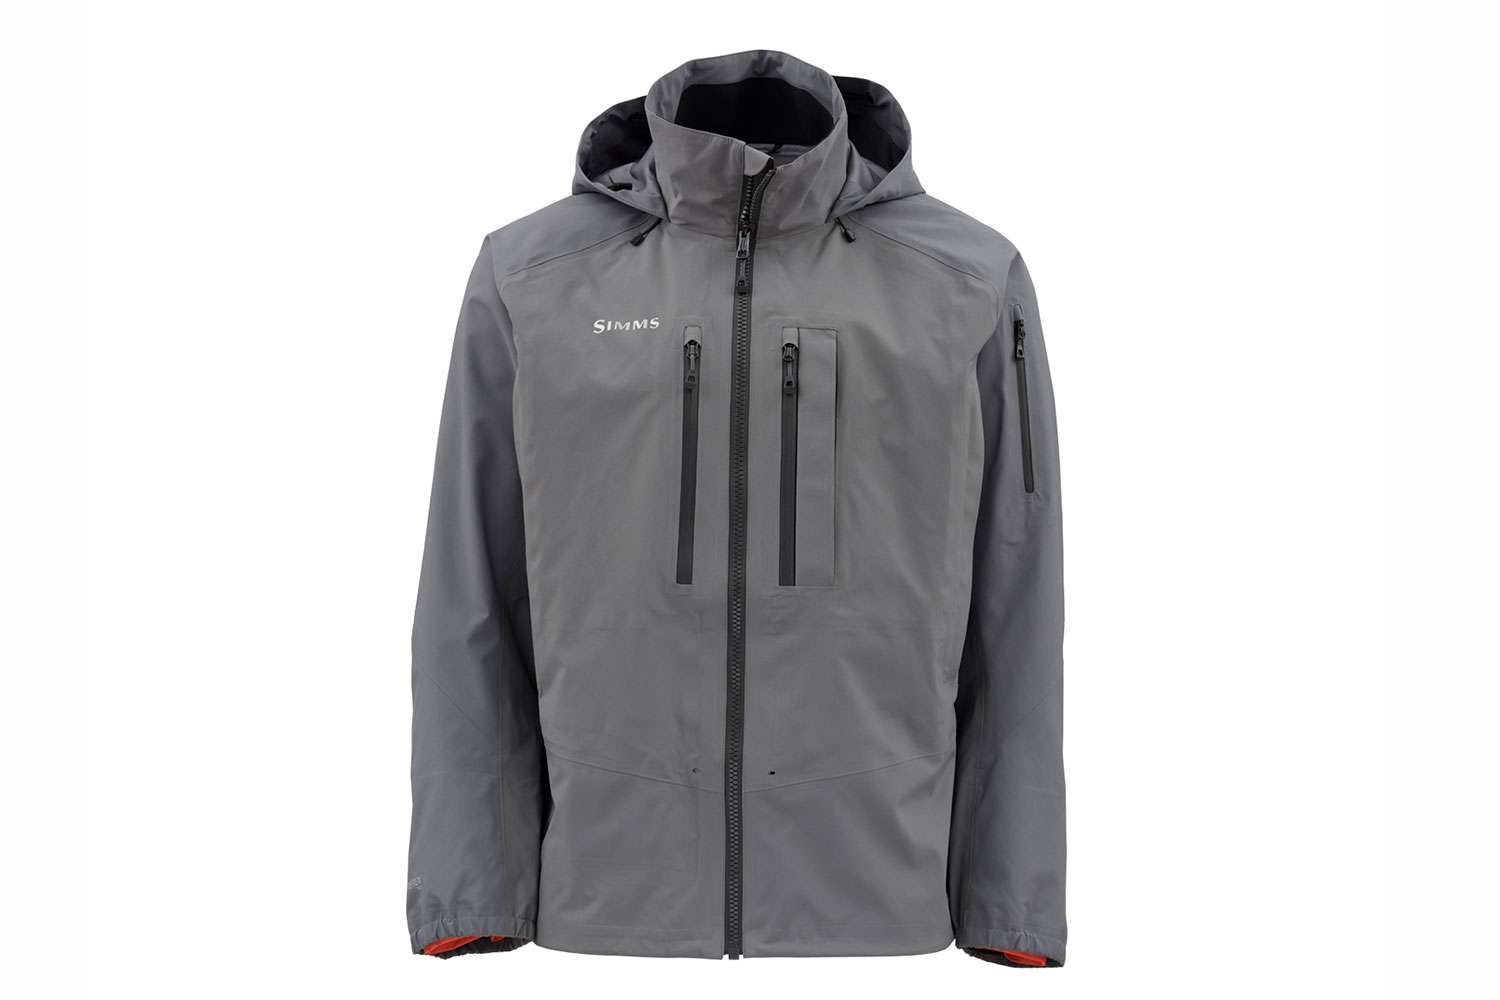 <p><b>Simms G4 Pro Jacket</b></p>
Constructed with extremely rugged 3-layer Gore-Tex Pro Shell fabric, the new G4 Pro Jacket offers the same amount of on-body storage delivered in a sleek and streamlined profile. Equipped with two large, fly box compatible, zippered chest pockets and a stash pocket on the sleeve, the jacket also features two zippered micro-fleece lined handwarmer pockets that give access to two rear game pockets. For even more storage and organization, anglers can take advantage of two stretch-woven, drop-in pockets as well as an interior, zippered stash pocket. For total foul-weather protection, the G4 Pro Jacket includes an oversized, 3-point adjustable storm hood with a high visibility accent as well as watertight shingle cuffs. Added features include a built-in sunglass chamois and a clever vertical flip-out fly patch that seamlessly tucks away when not in use.<br>
<p><b>MSRP: $649.95</b></p>
<a href=